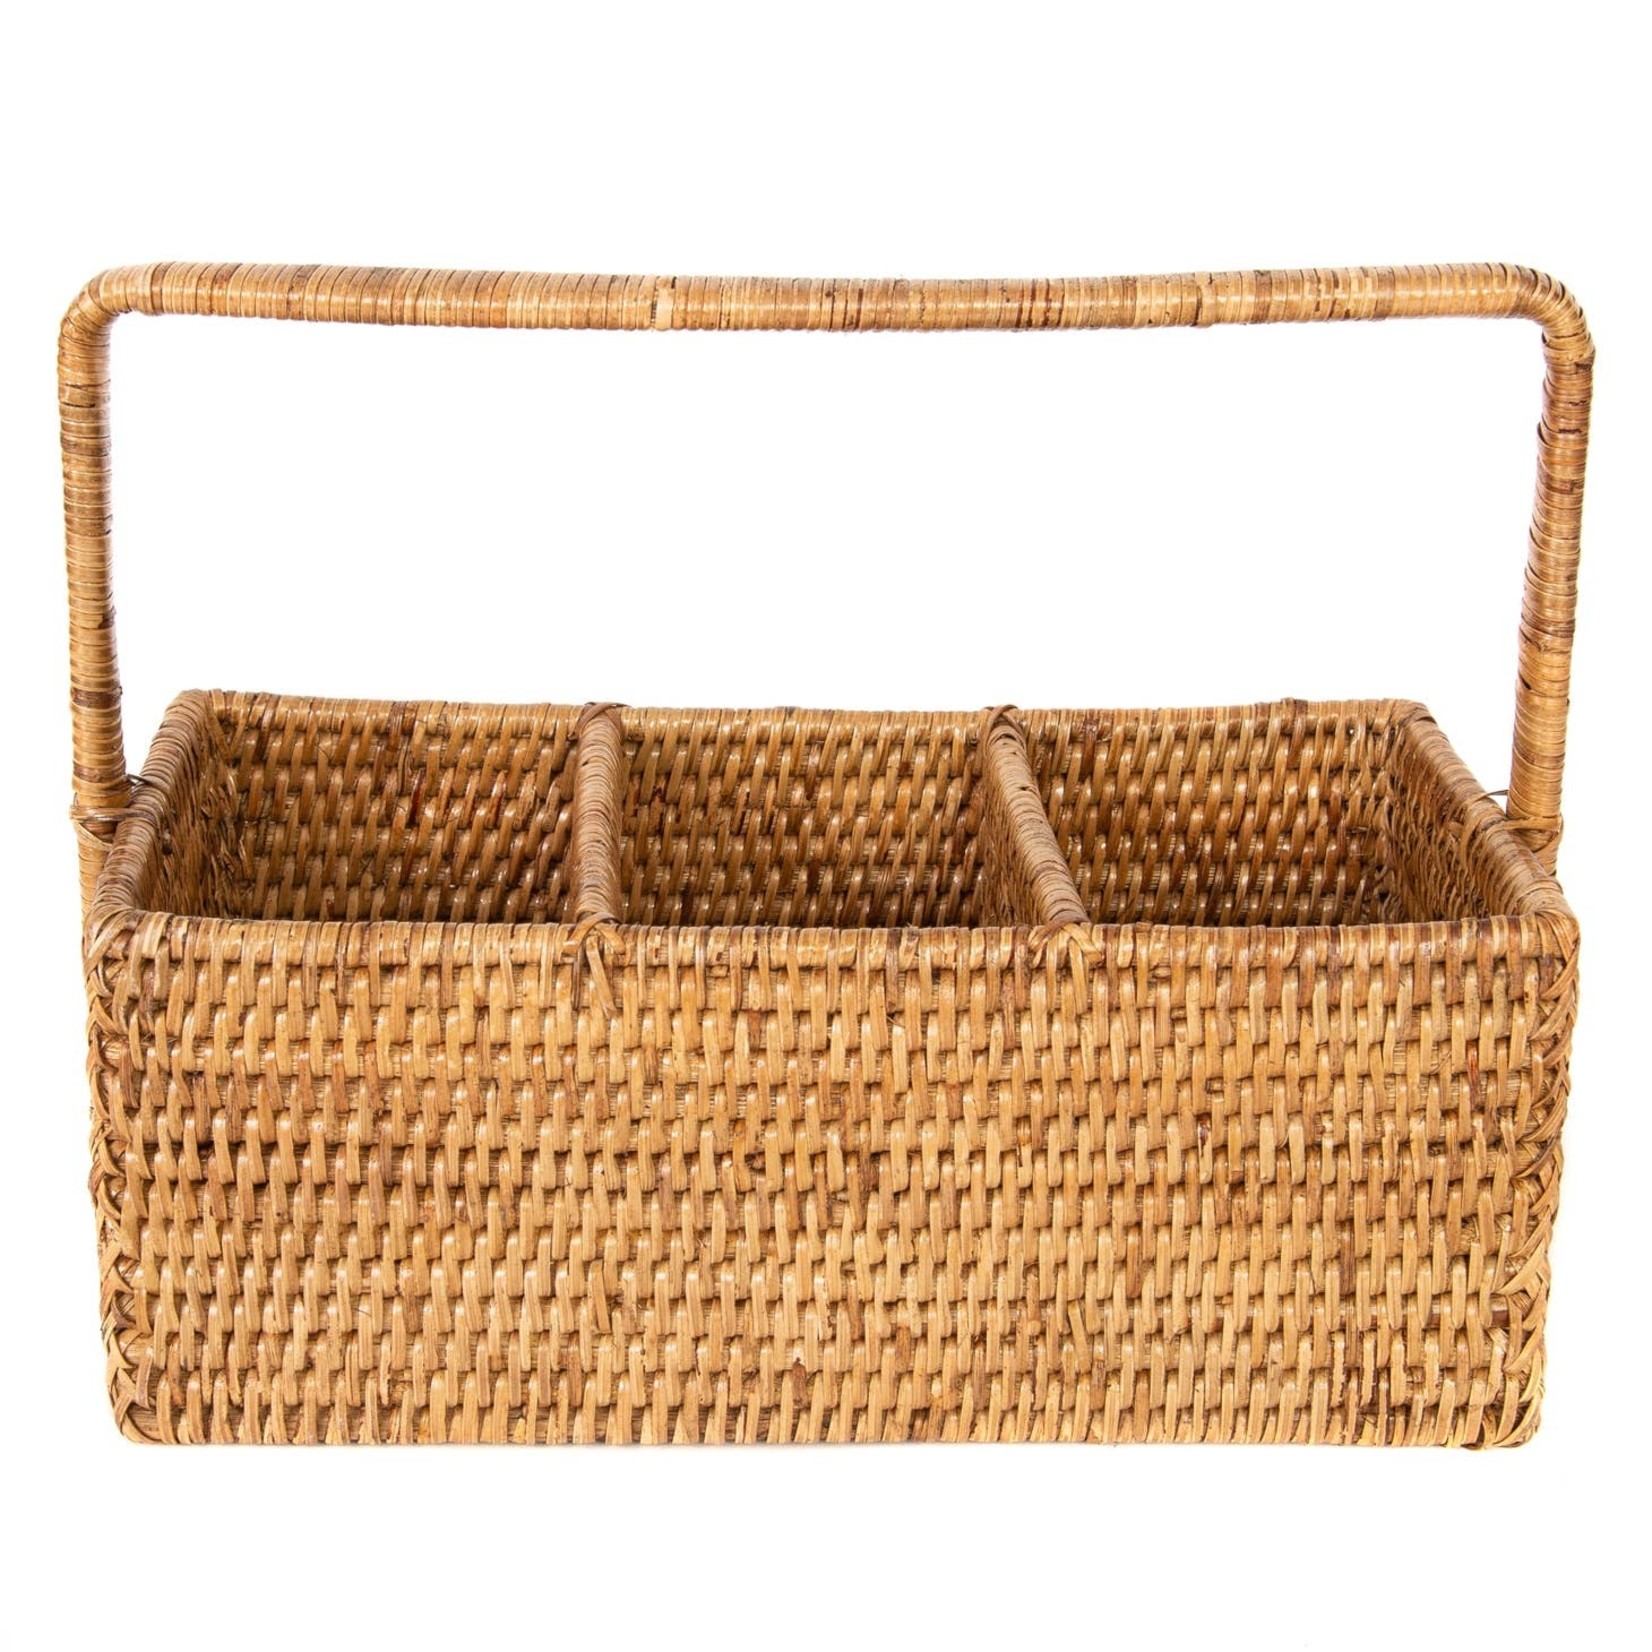 Wicker Rattan Sectioned Caddy Utensil Basket w/ Dividers Leather Type Handle